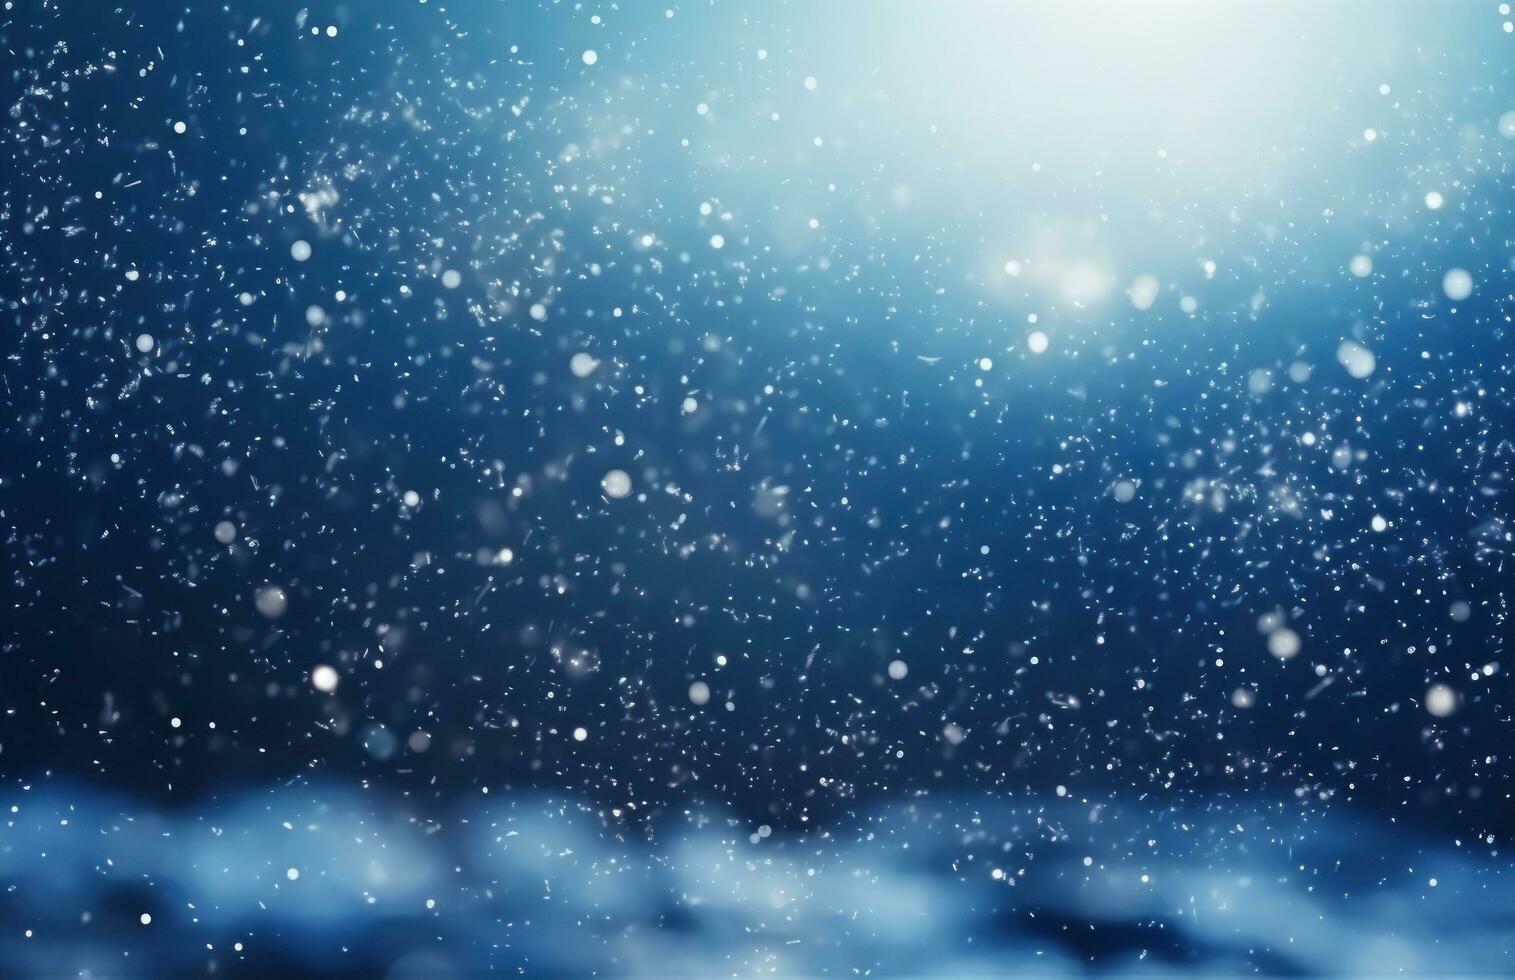 cold background with snow falling from the sky, photo